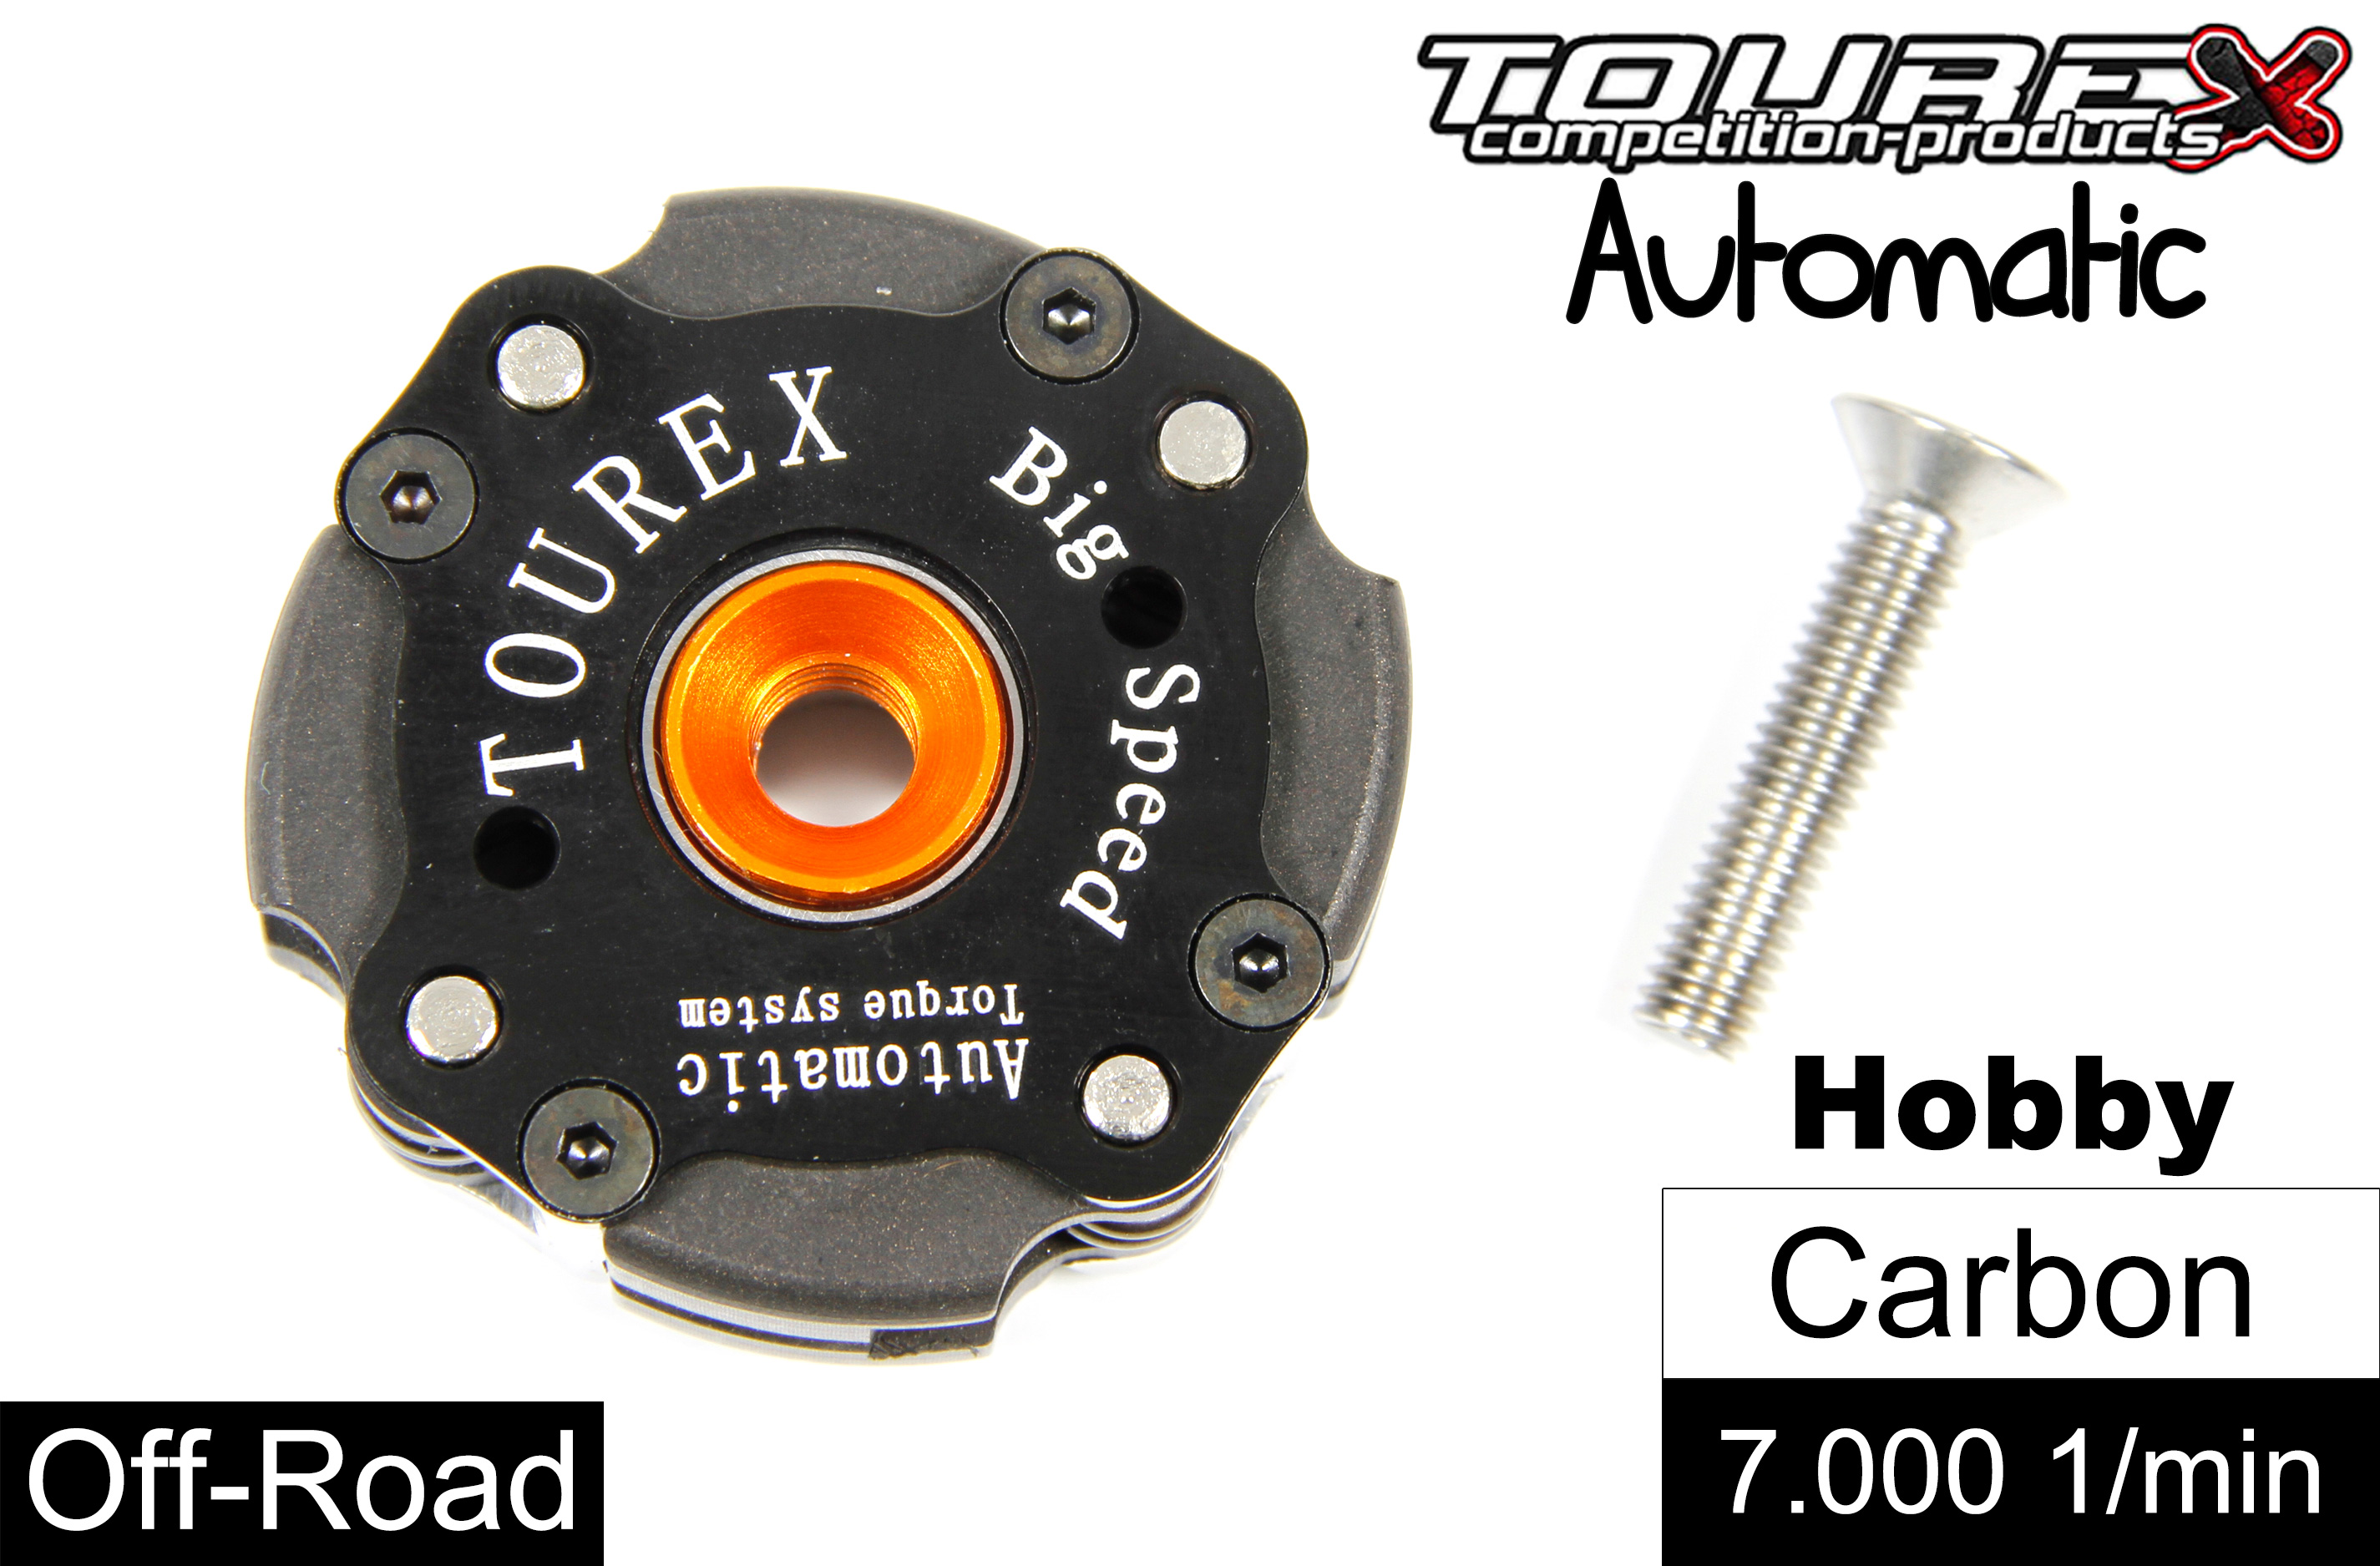 TXLA-910 Tourex Big-Speed Automatic for FG/HPI/Losi/Smartech and many more